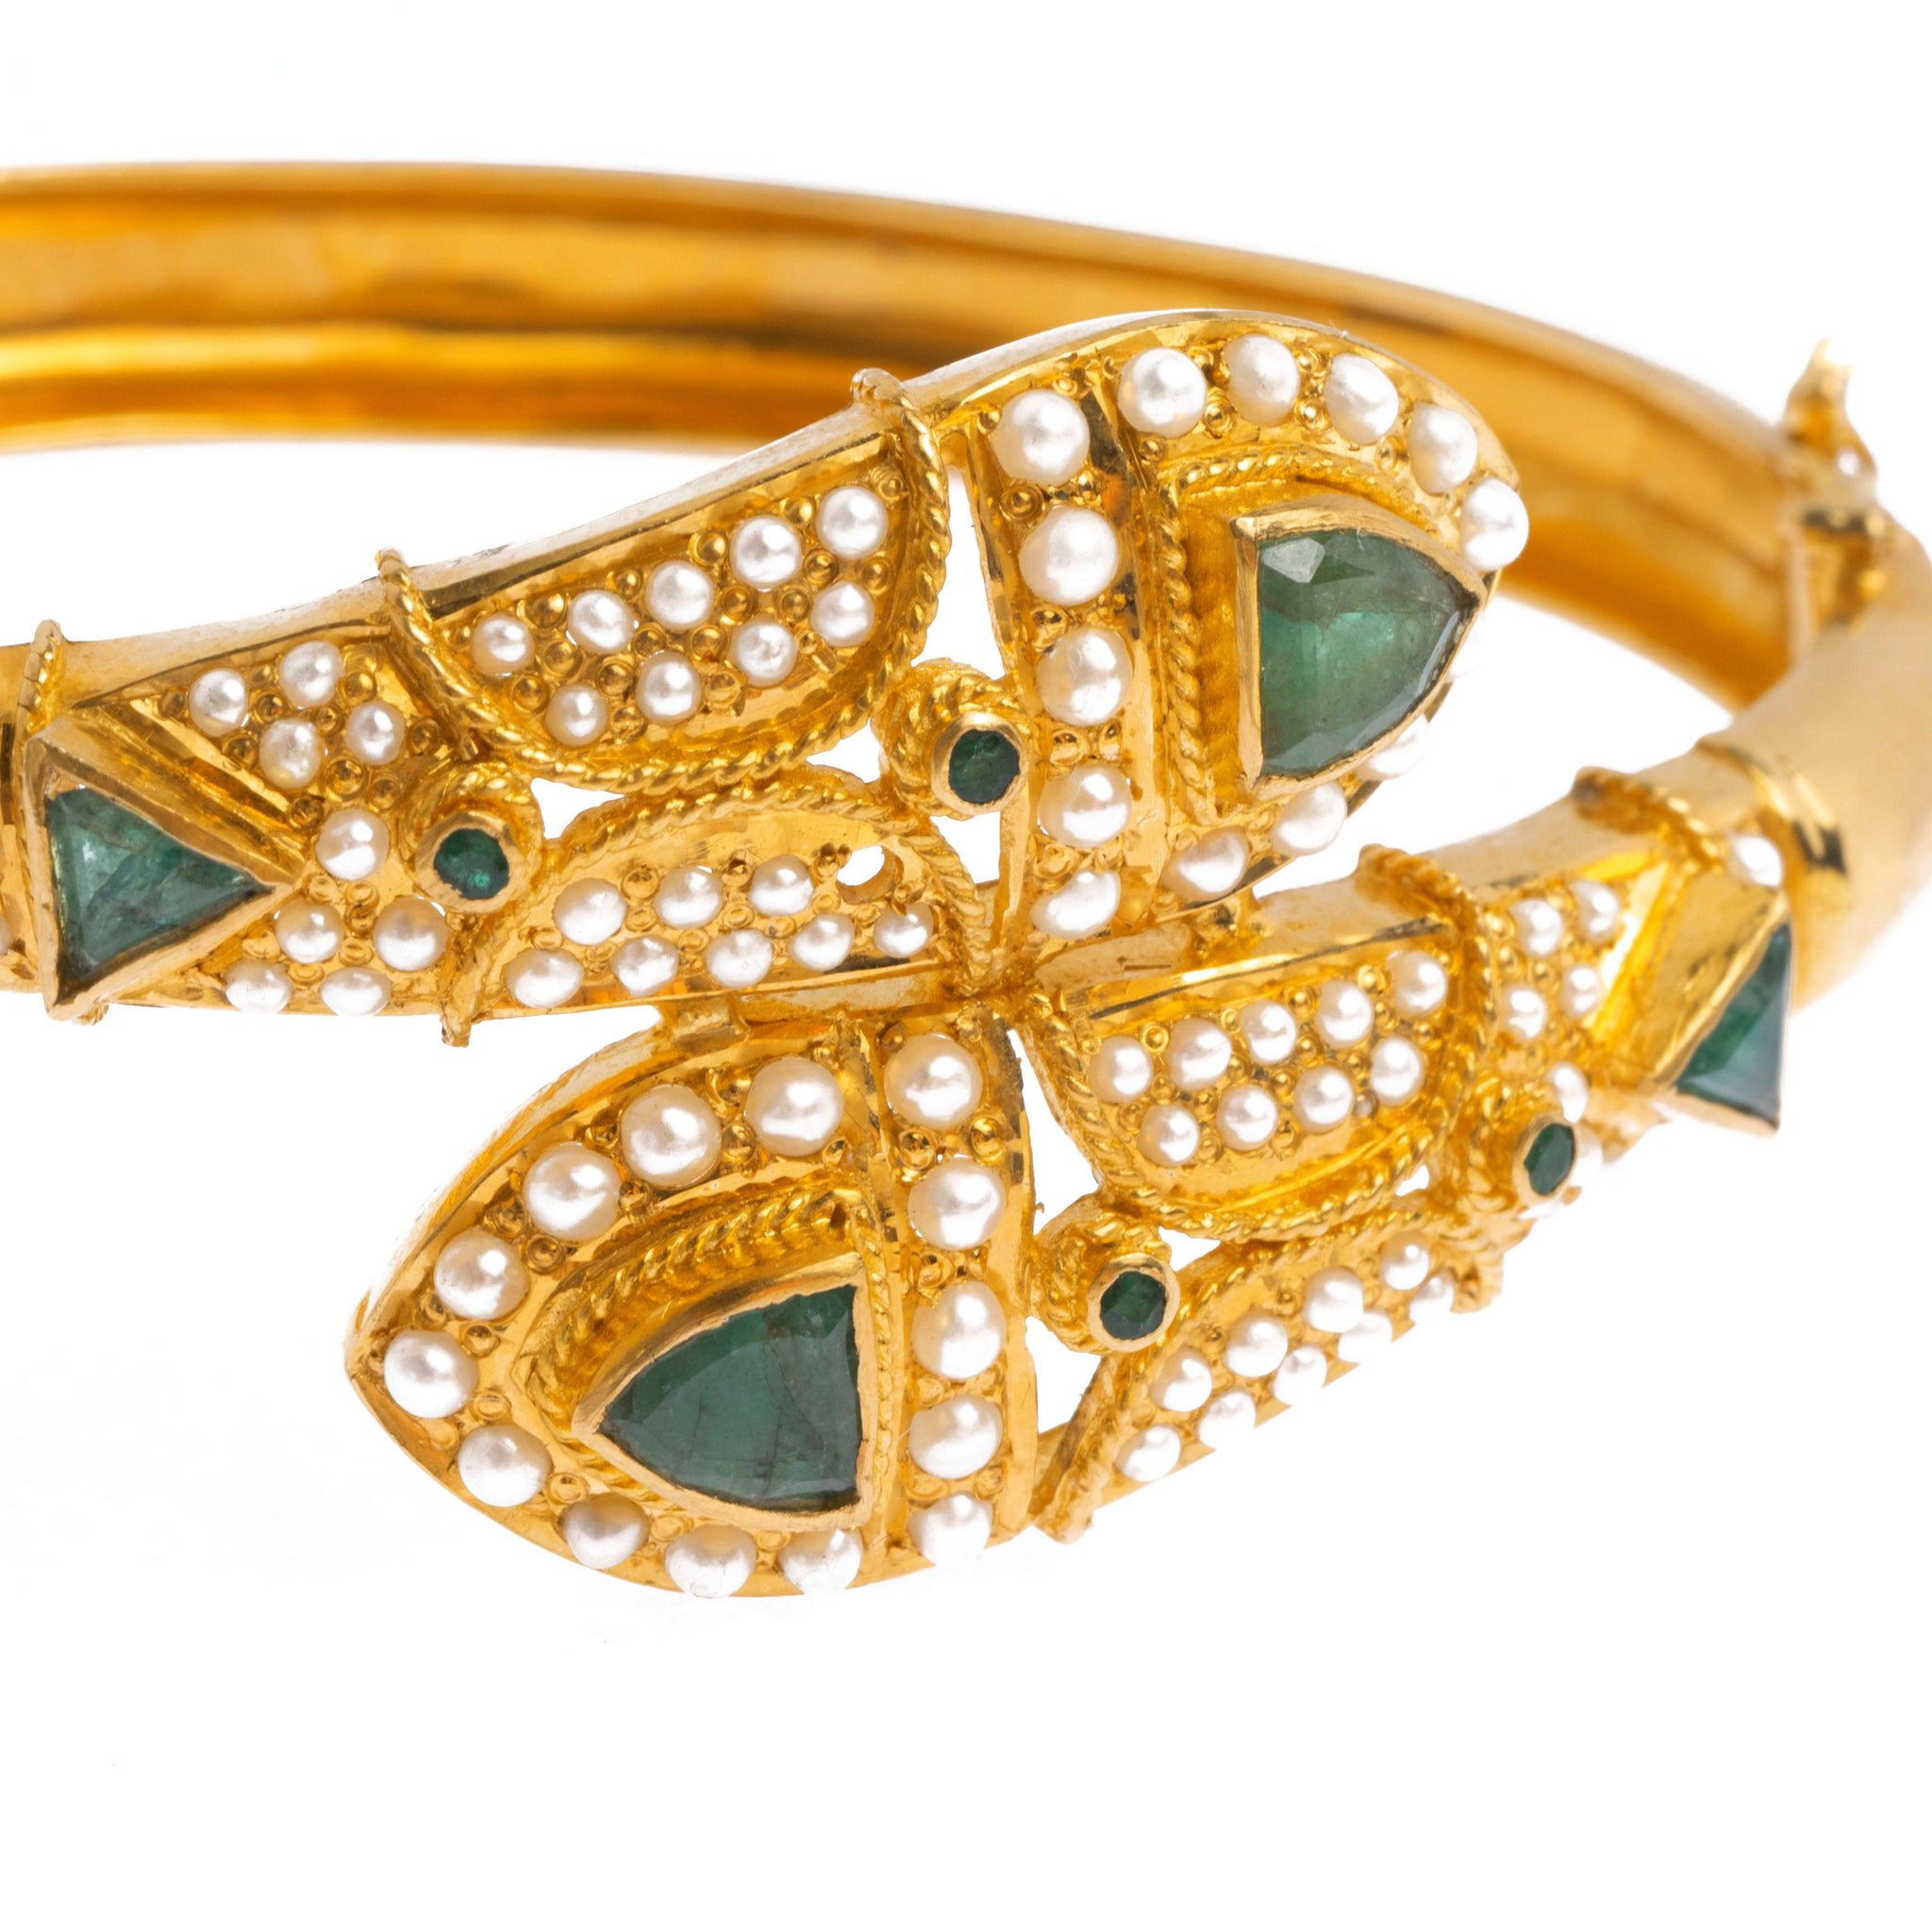 22ct Gold Antiquated Look Openable Bangle set with Green Stones and Cultured Pearls B-8447